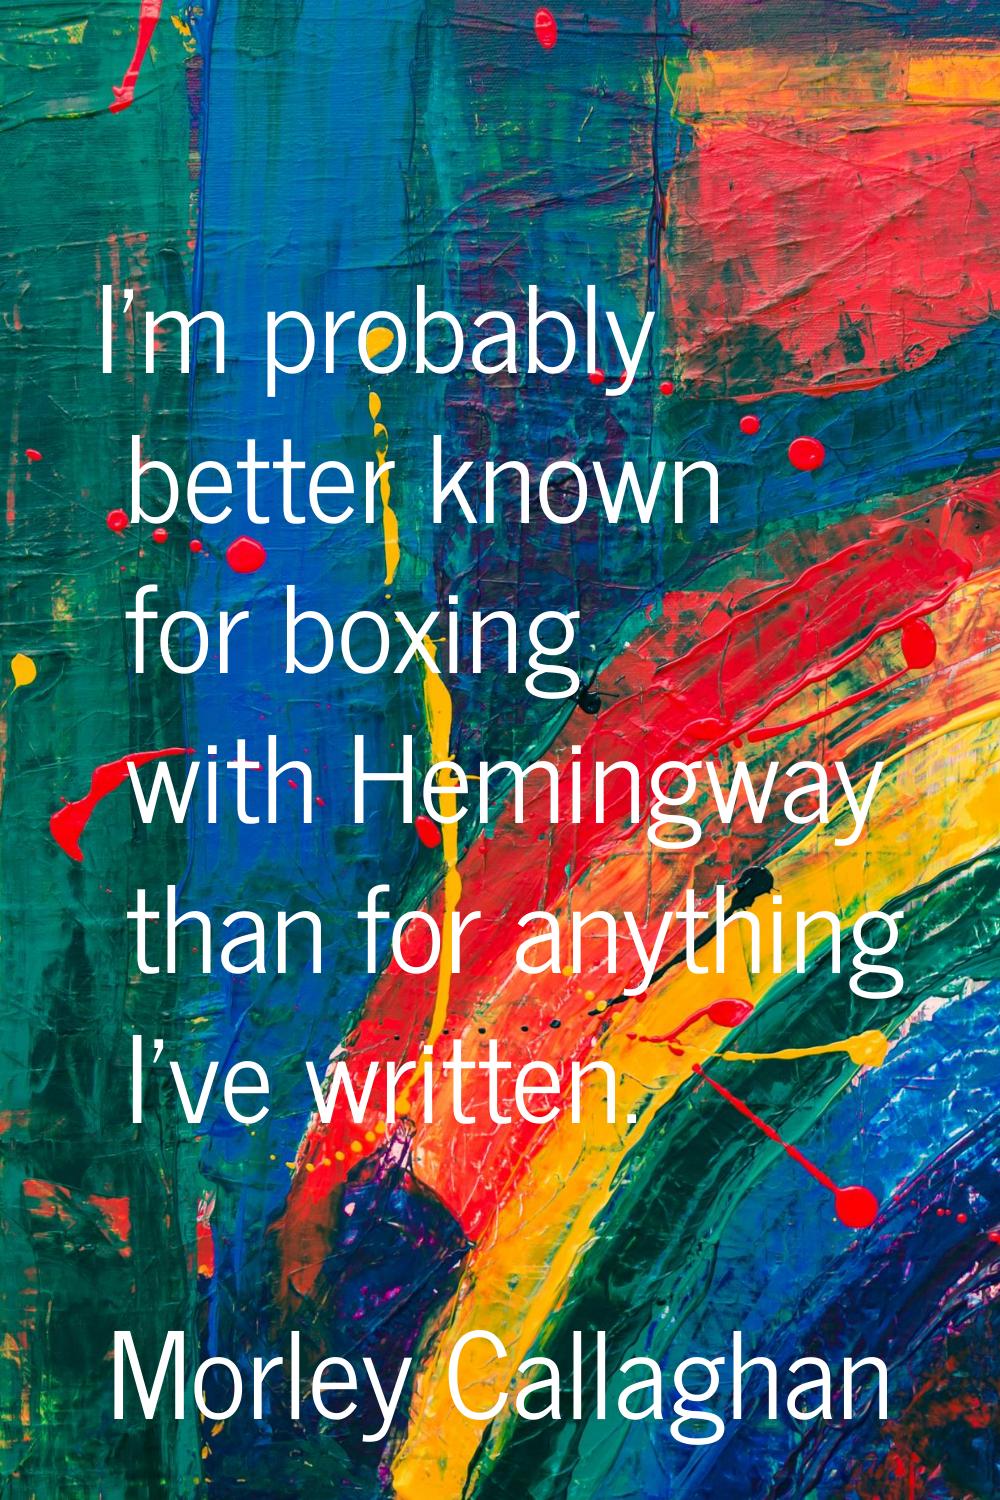 I'm probably better known for boxing with Hemingway than for anything I've written.